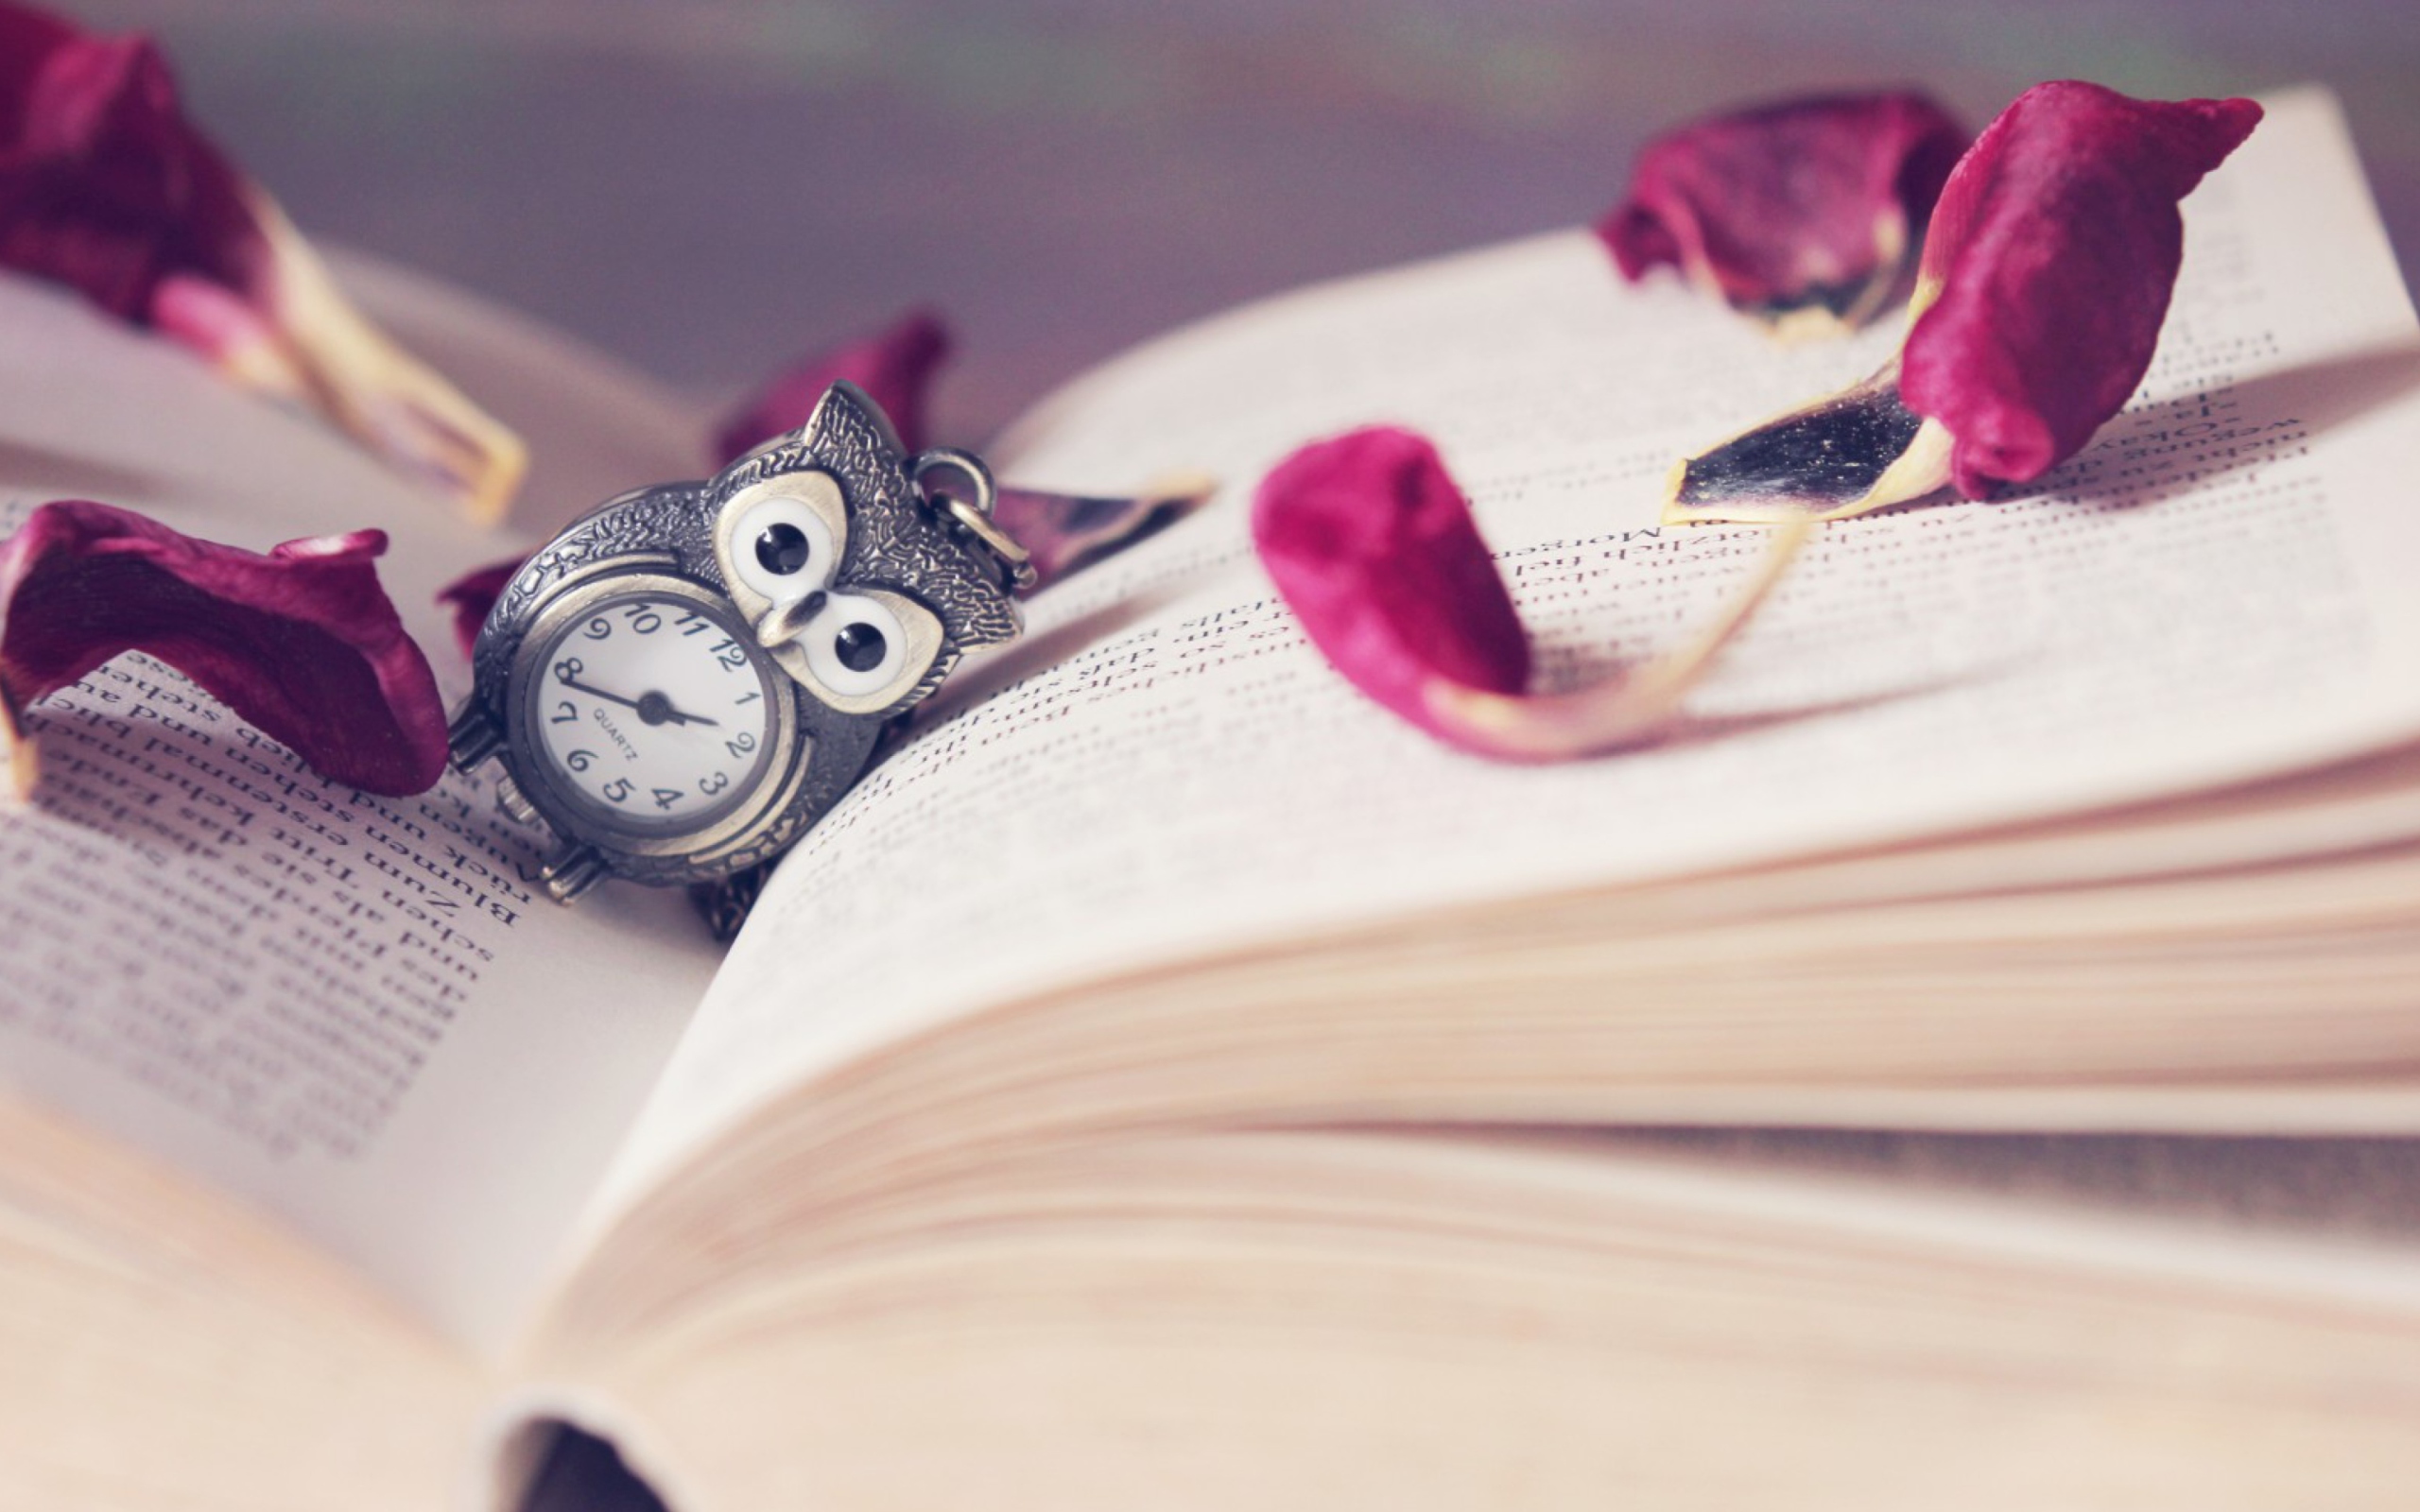 Vintage Owl Watch And Book wallpaper 2560x1600